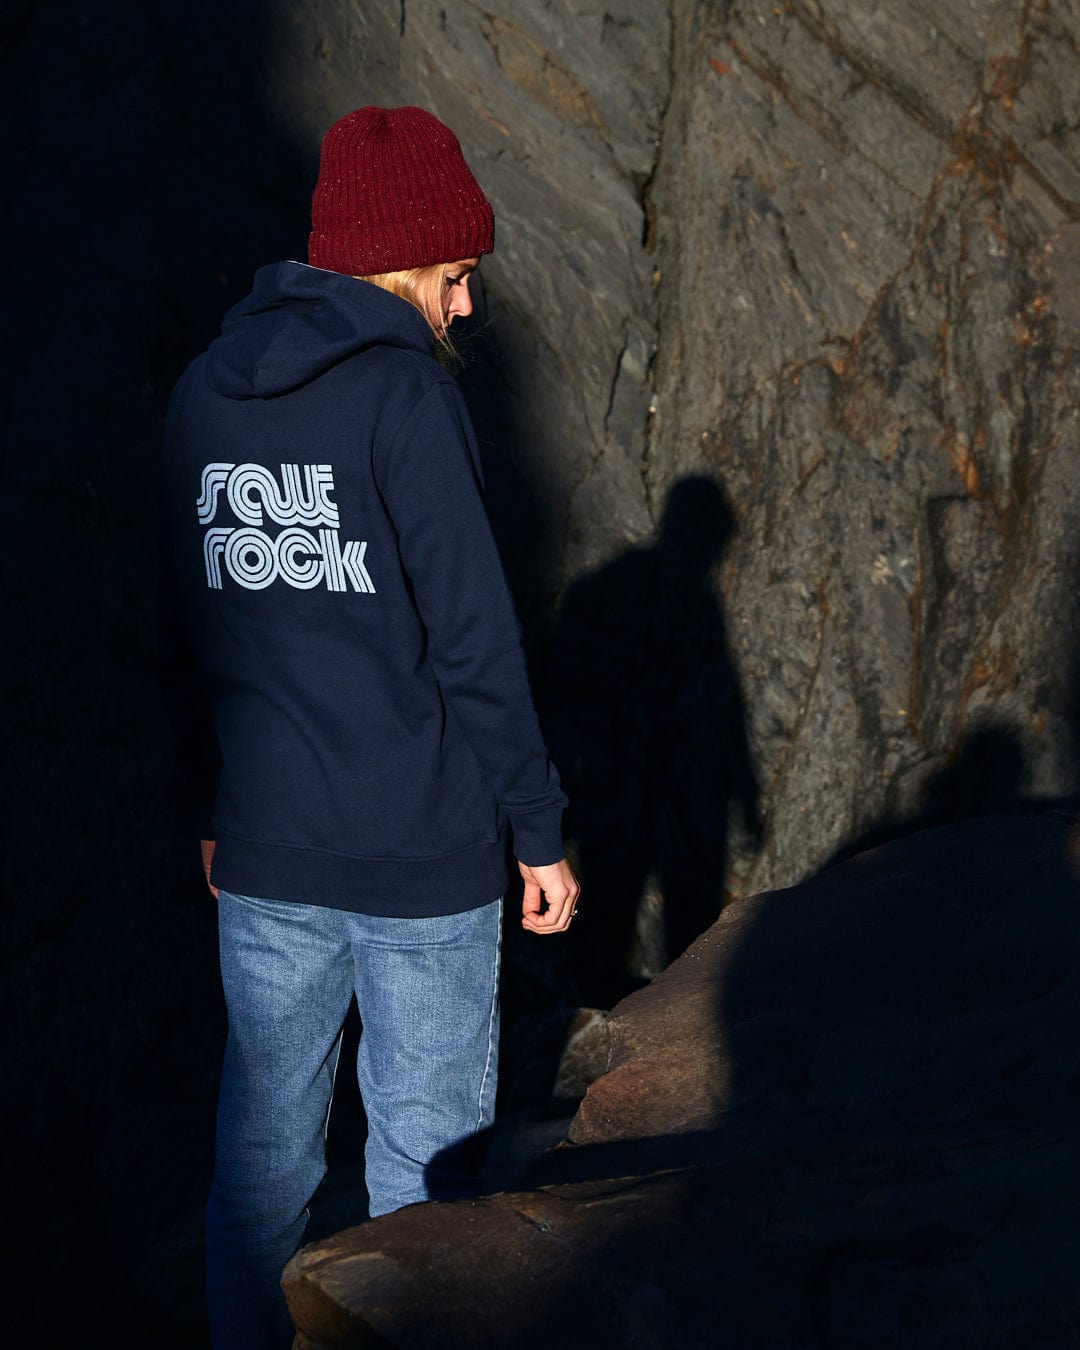 A person standing on a rock with a Saltrock Retro Wave Emb - Womens Zip Hoodie - Blue on, featuring front pockets and hood lining.